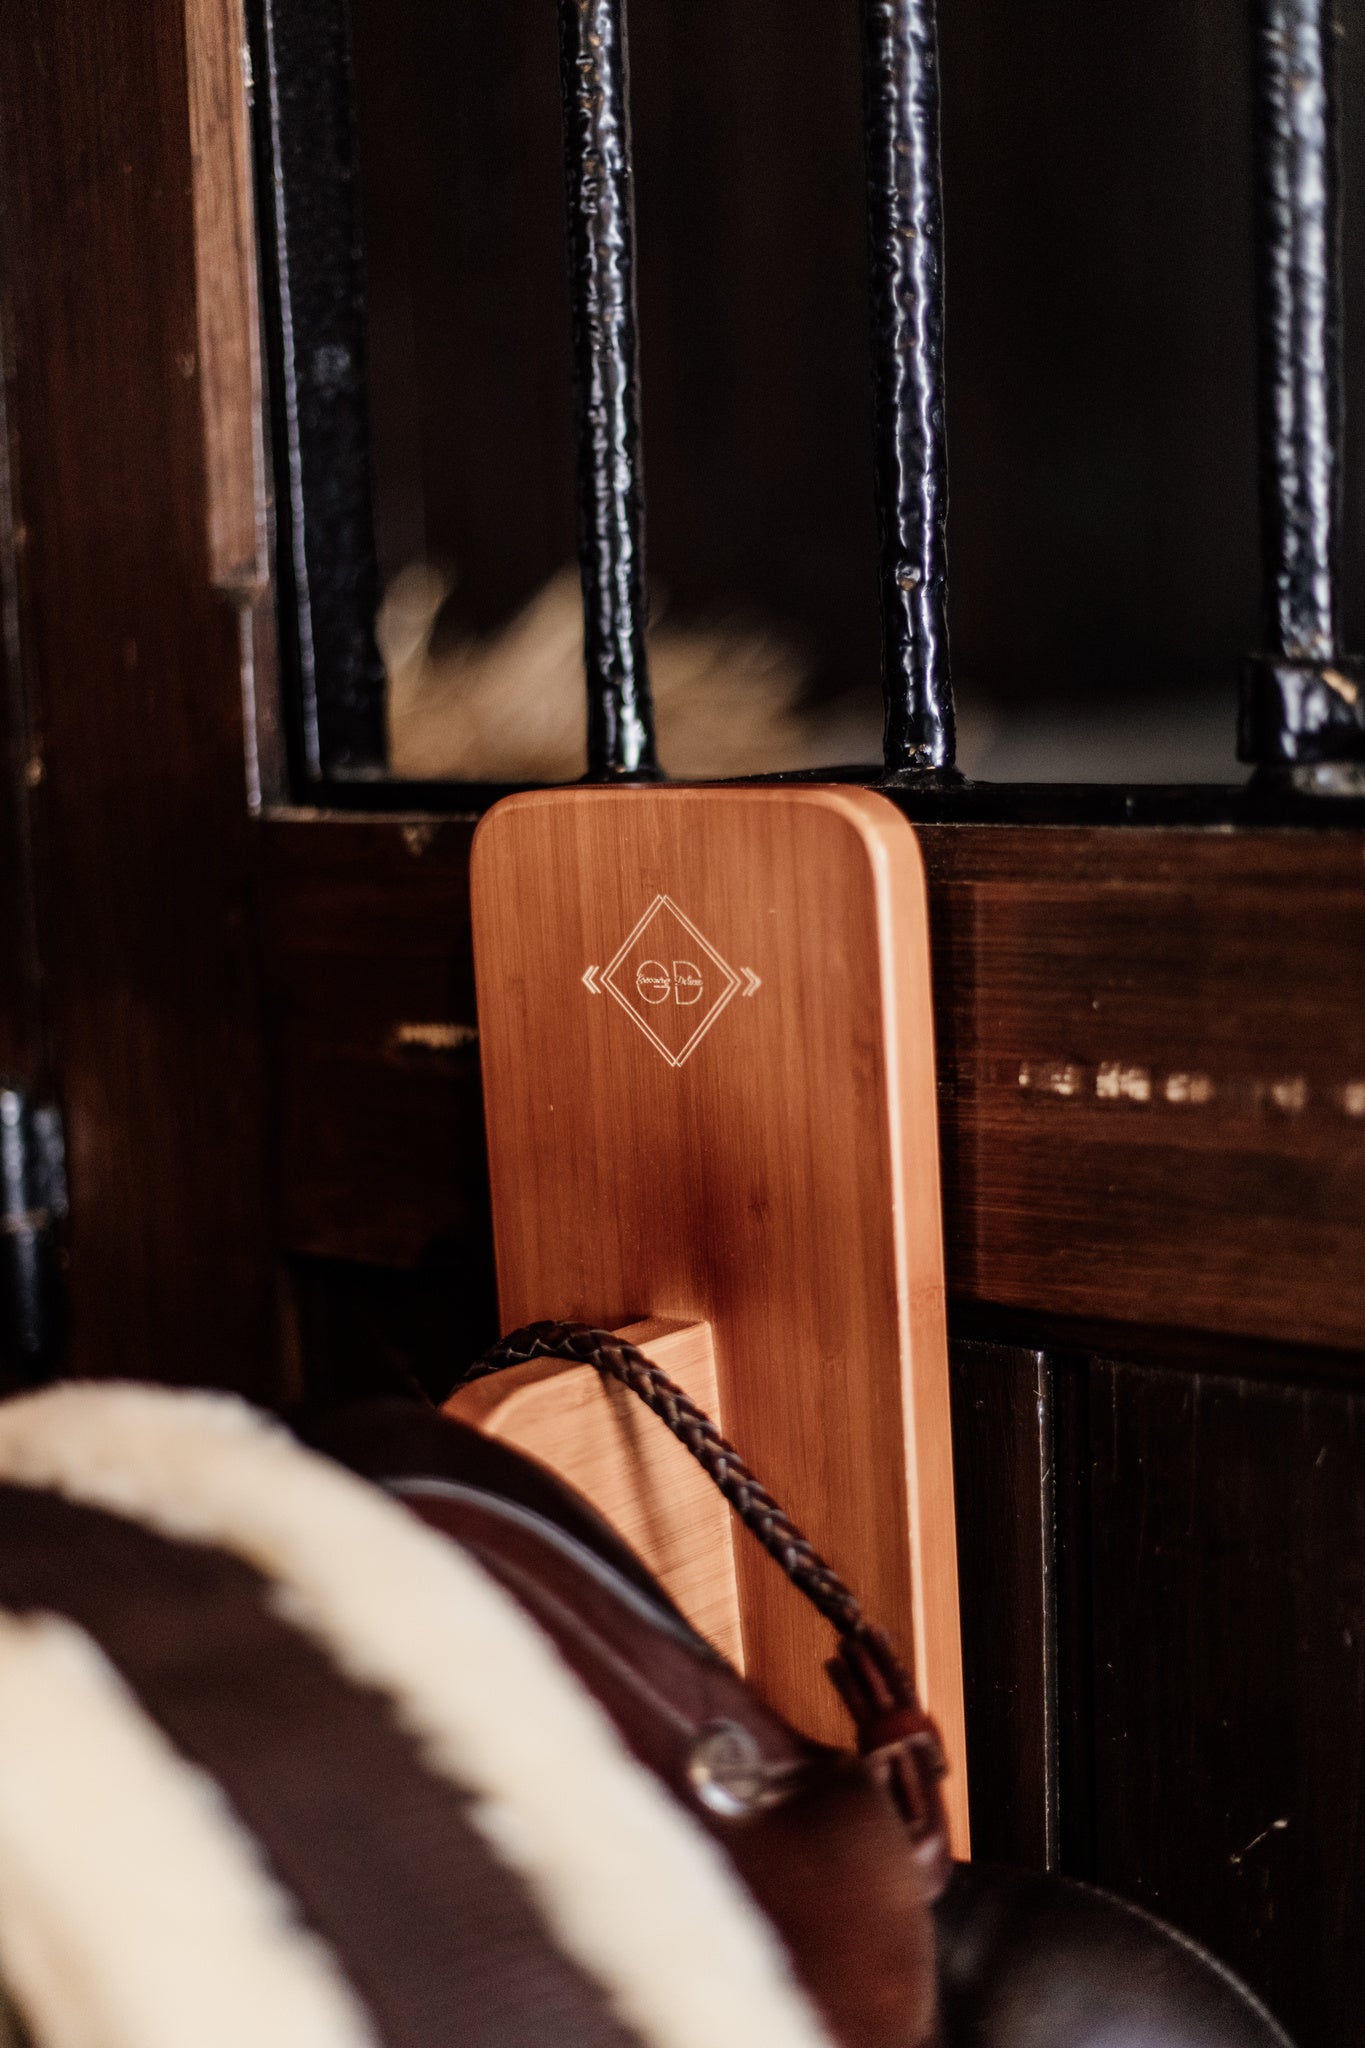 Kentucky saddle rack with two saddle pegs. Made with strong bamboo and finished with a small gold Kentucky logo. This is the perfect piece for any tack room.